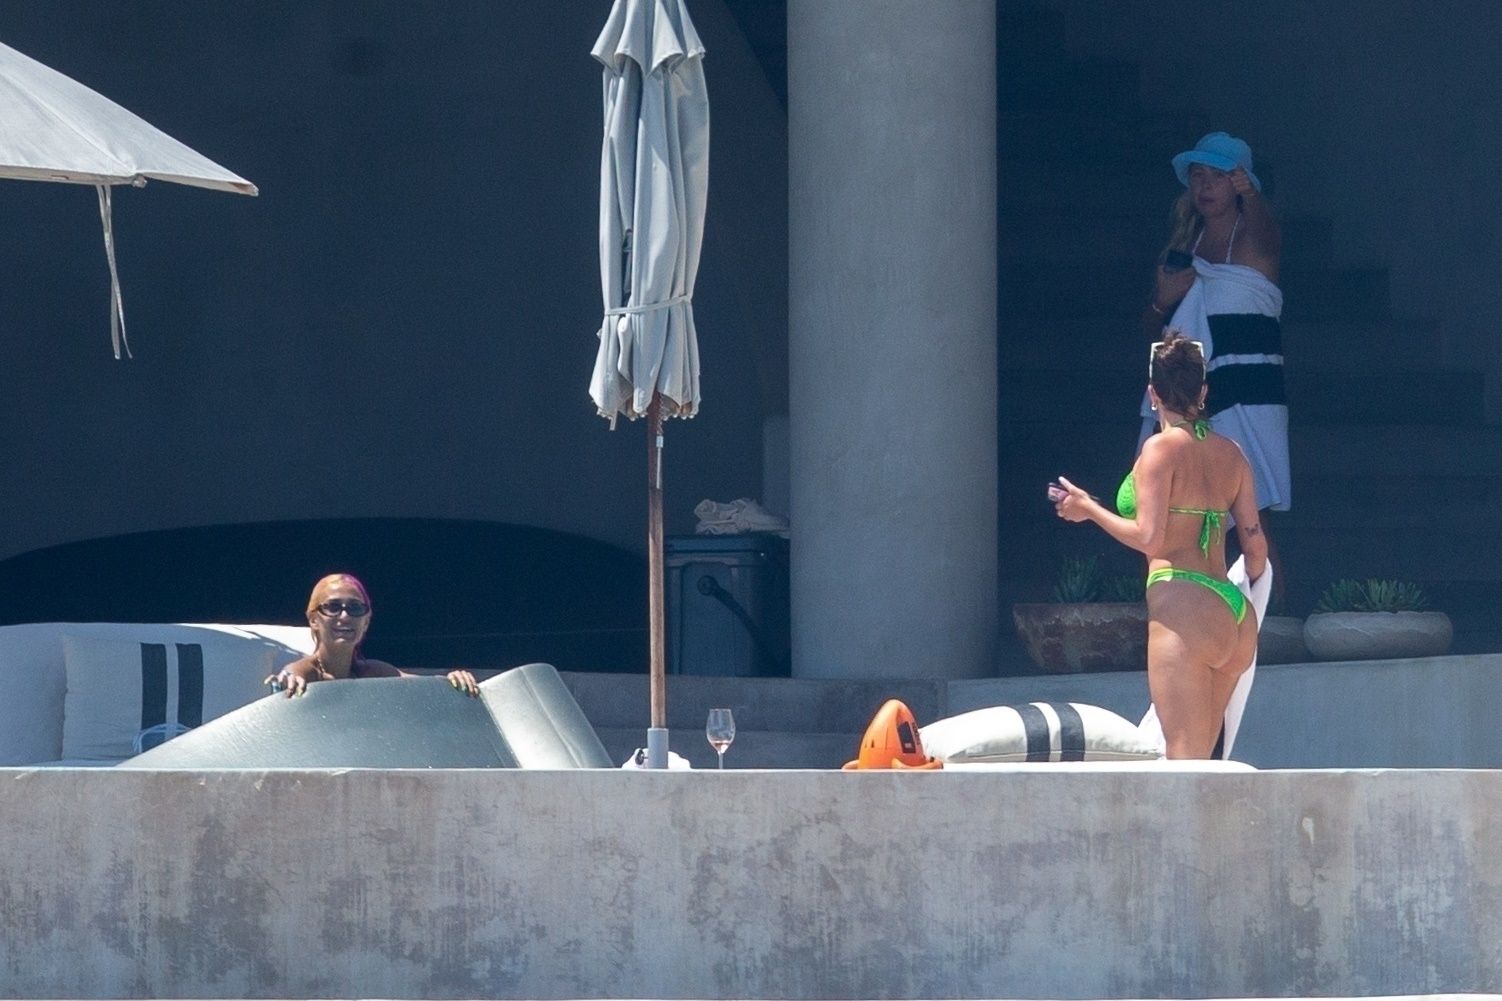 Sofia Richie Laughs During a Playful Day Spent Swimming in the Pool with Her Pals (57 Photos)